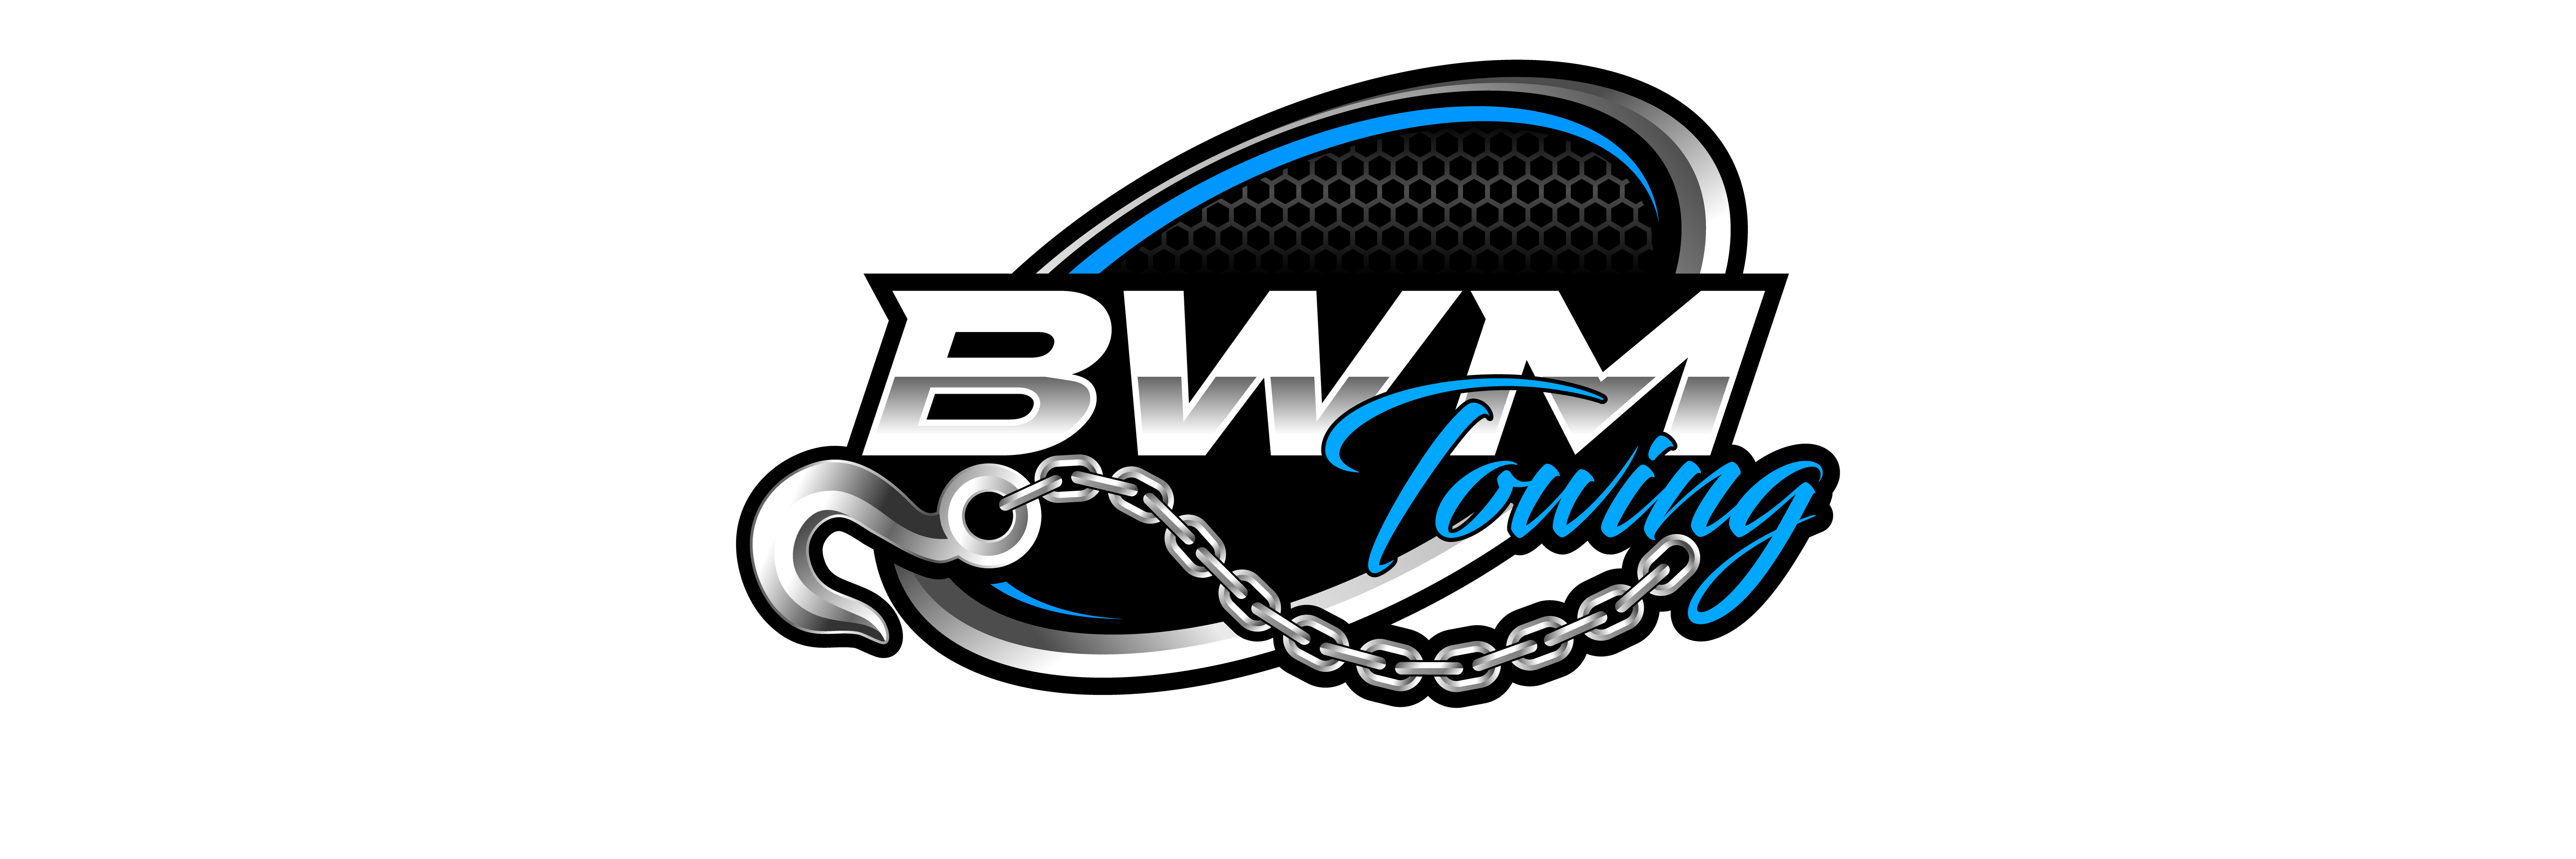 BWM TOWING Towing.com Profile Banner